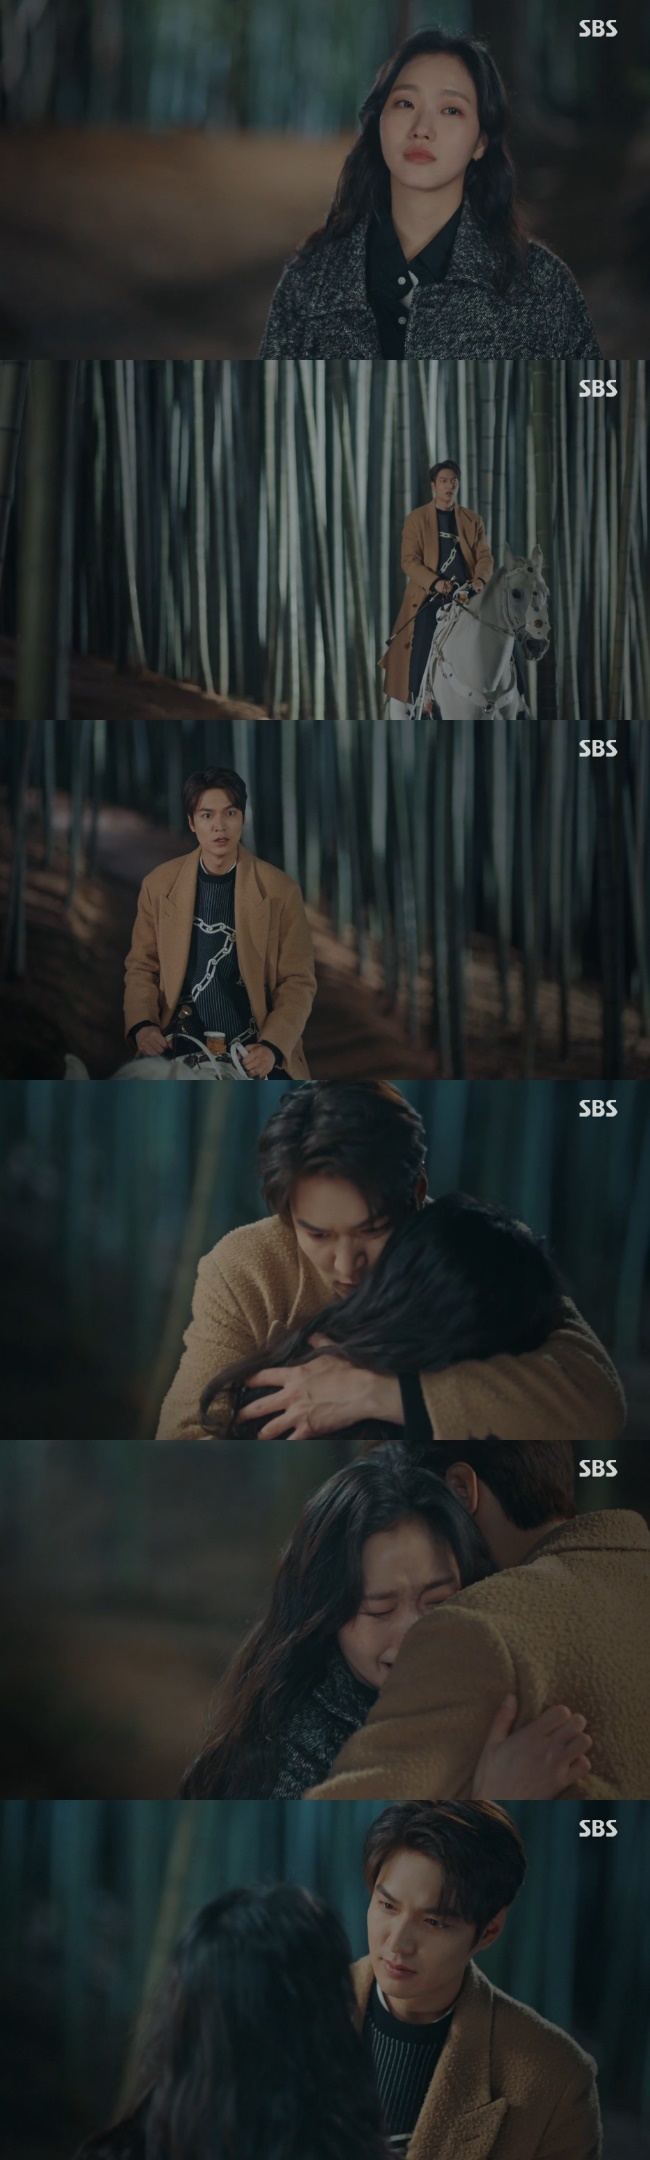 Lee Min-ho and Kim Go-eun do The Slap of TearsIn the 10th episode of SBSs Golden Earth Drama The King: The Lord of Eternity (playplayed by Kim Eun-sook/directed by Baek Sang-hoon and Jung Ji-hyun), which aired on May 16, Kim Go-eun waited for Lee Gon in front of the bamboo forest.Jeong Tae-eul went to the bamboo forest, drawing Igon, who left for the Korean Empire, and then he heard a horse and saw Igon running in Maximus.Jung Tae-eul ran toward Igon with tears. Jung Tae-eul, who grabbed him, asked, Are you here? Are you here now? Are you here?Lee Ha-na